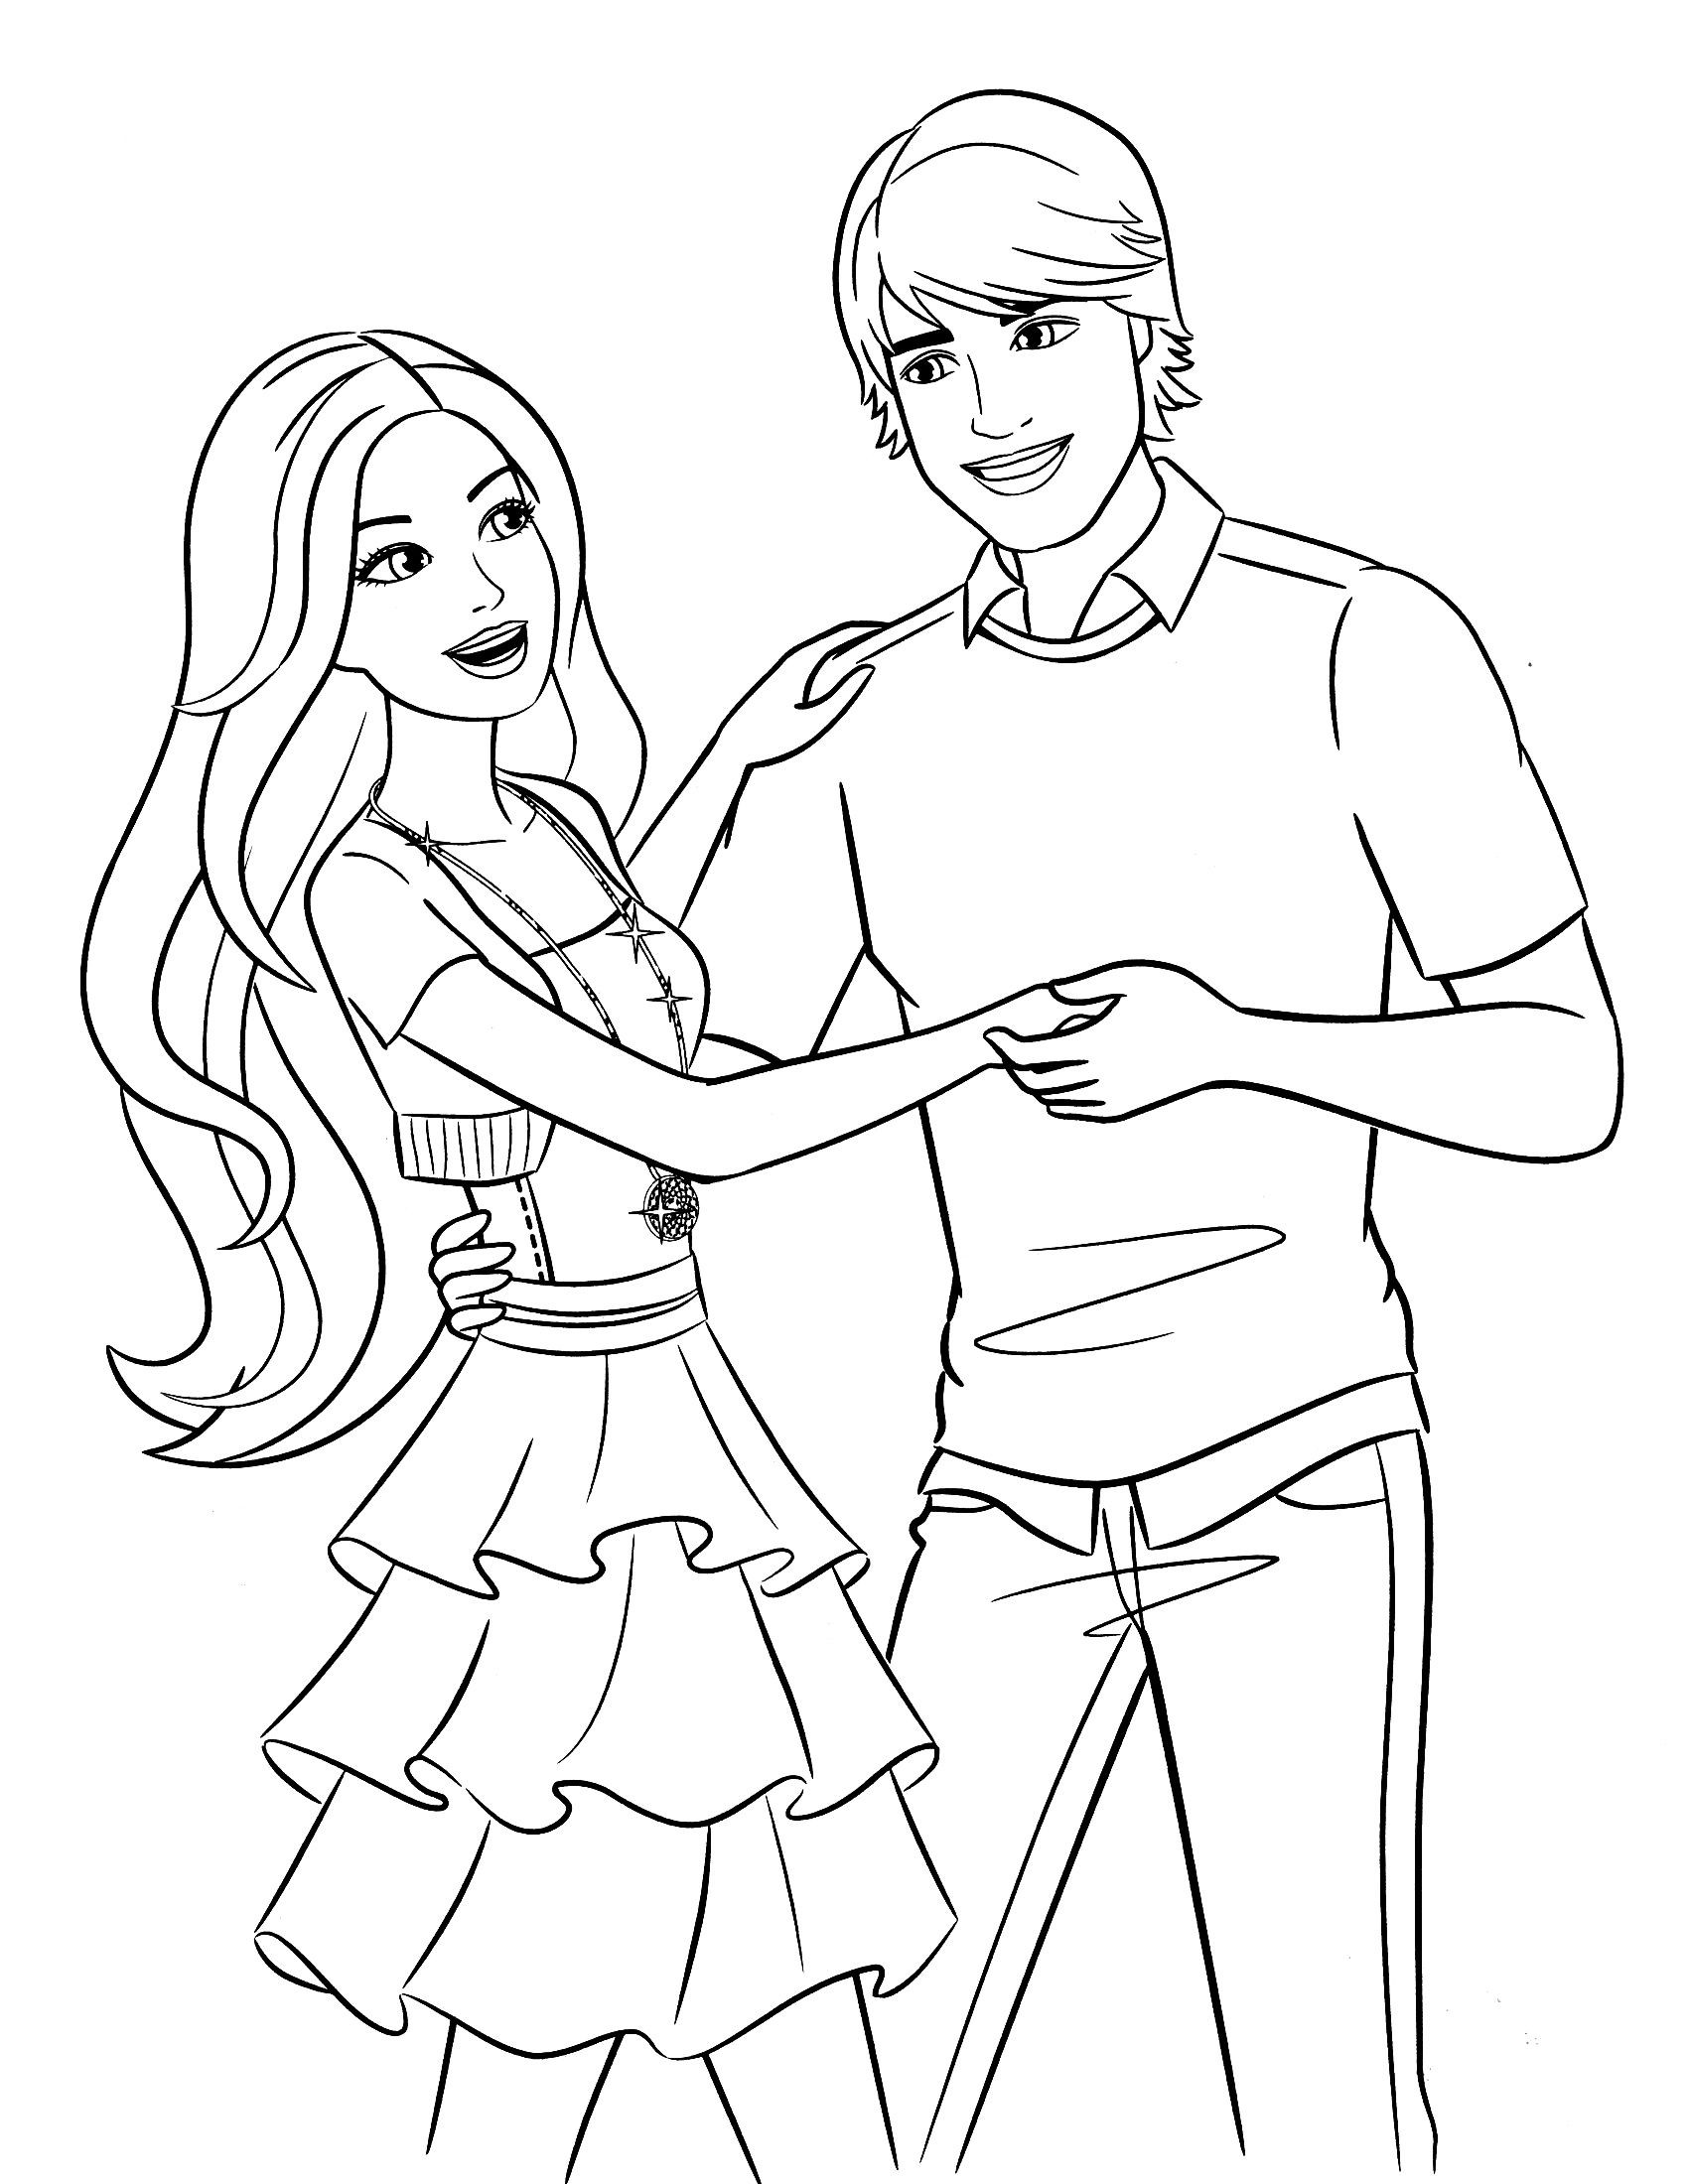 Image from content 2014 10 barbie and ken coloring pages WuvG